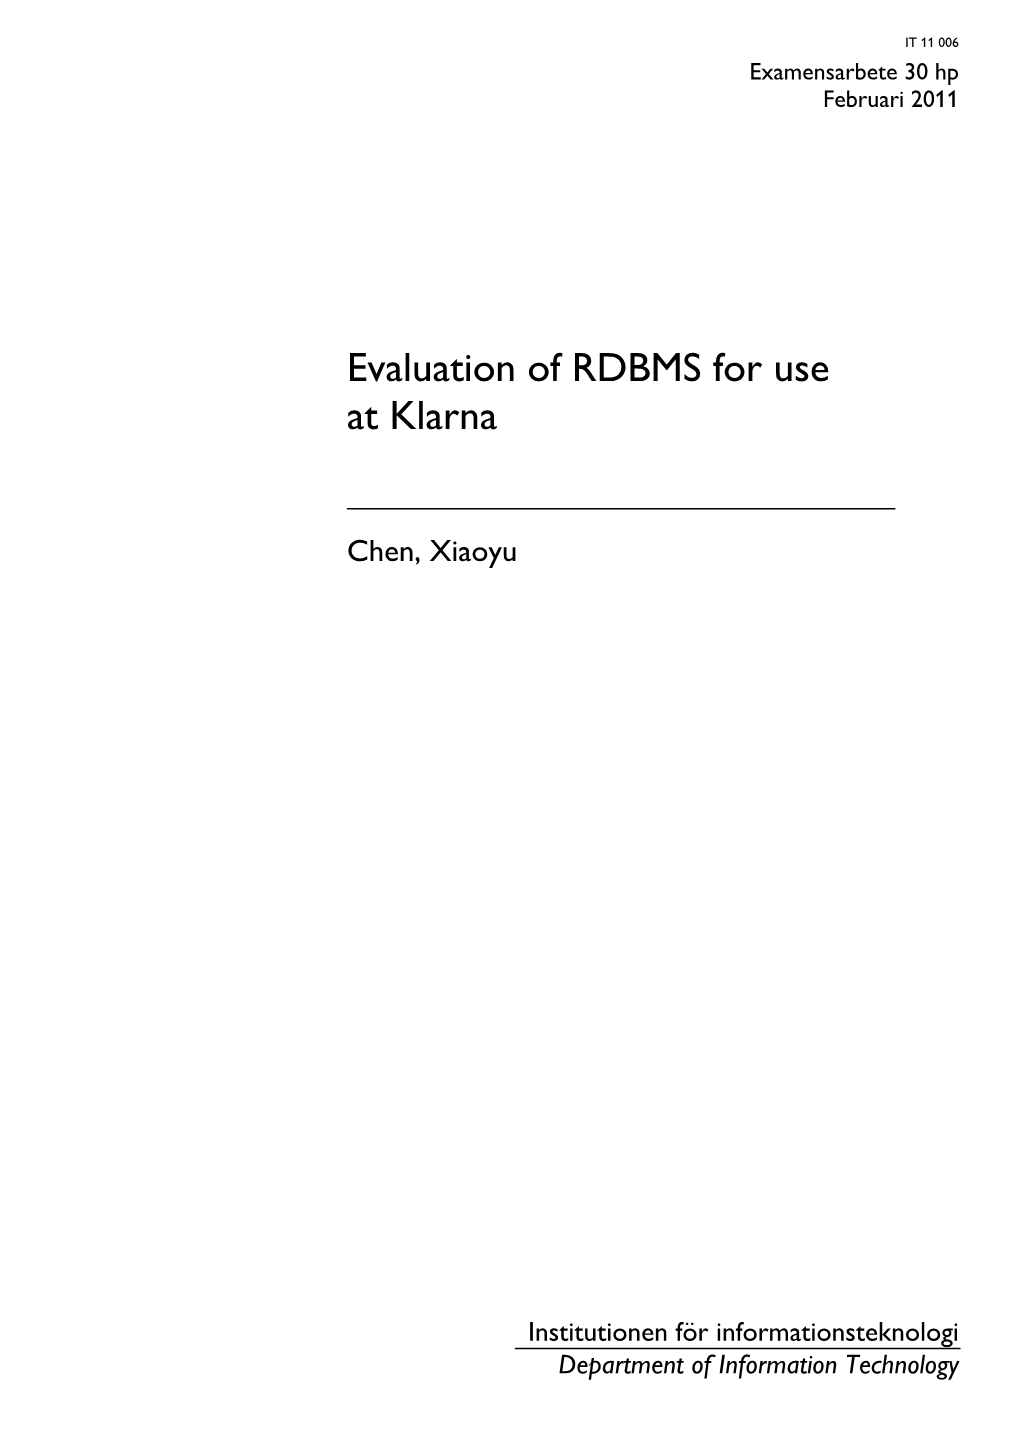 Evaluation of RDBMS for Use at Klarna